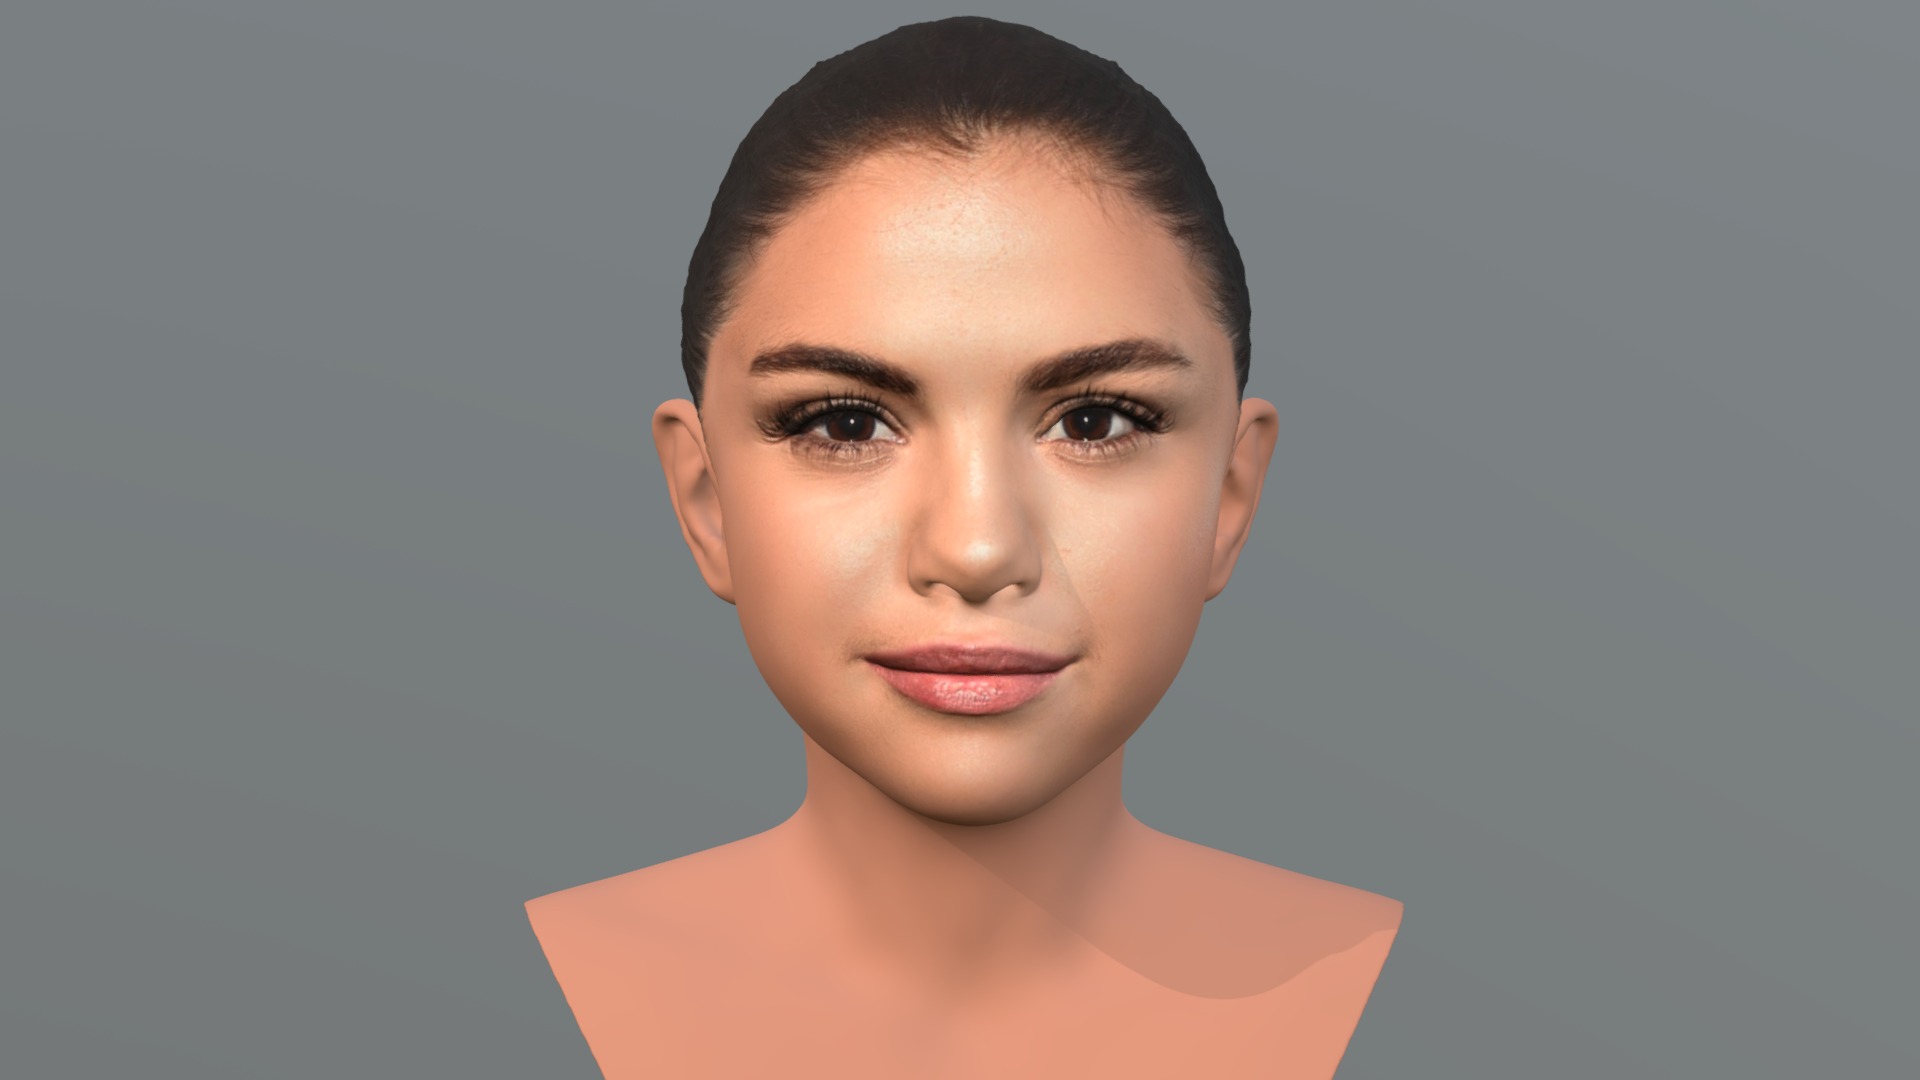 3D model Selena Gomez bust for full color 3D printing - This is a 3D model of the Selena Gomez bust for full color 3D printing. The 3D model is about a person with short black hair.